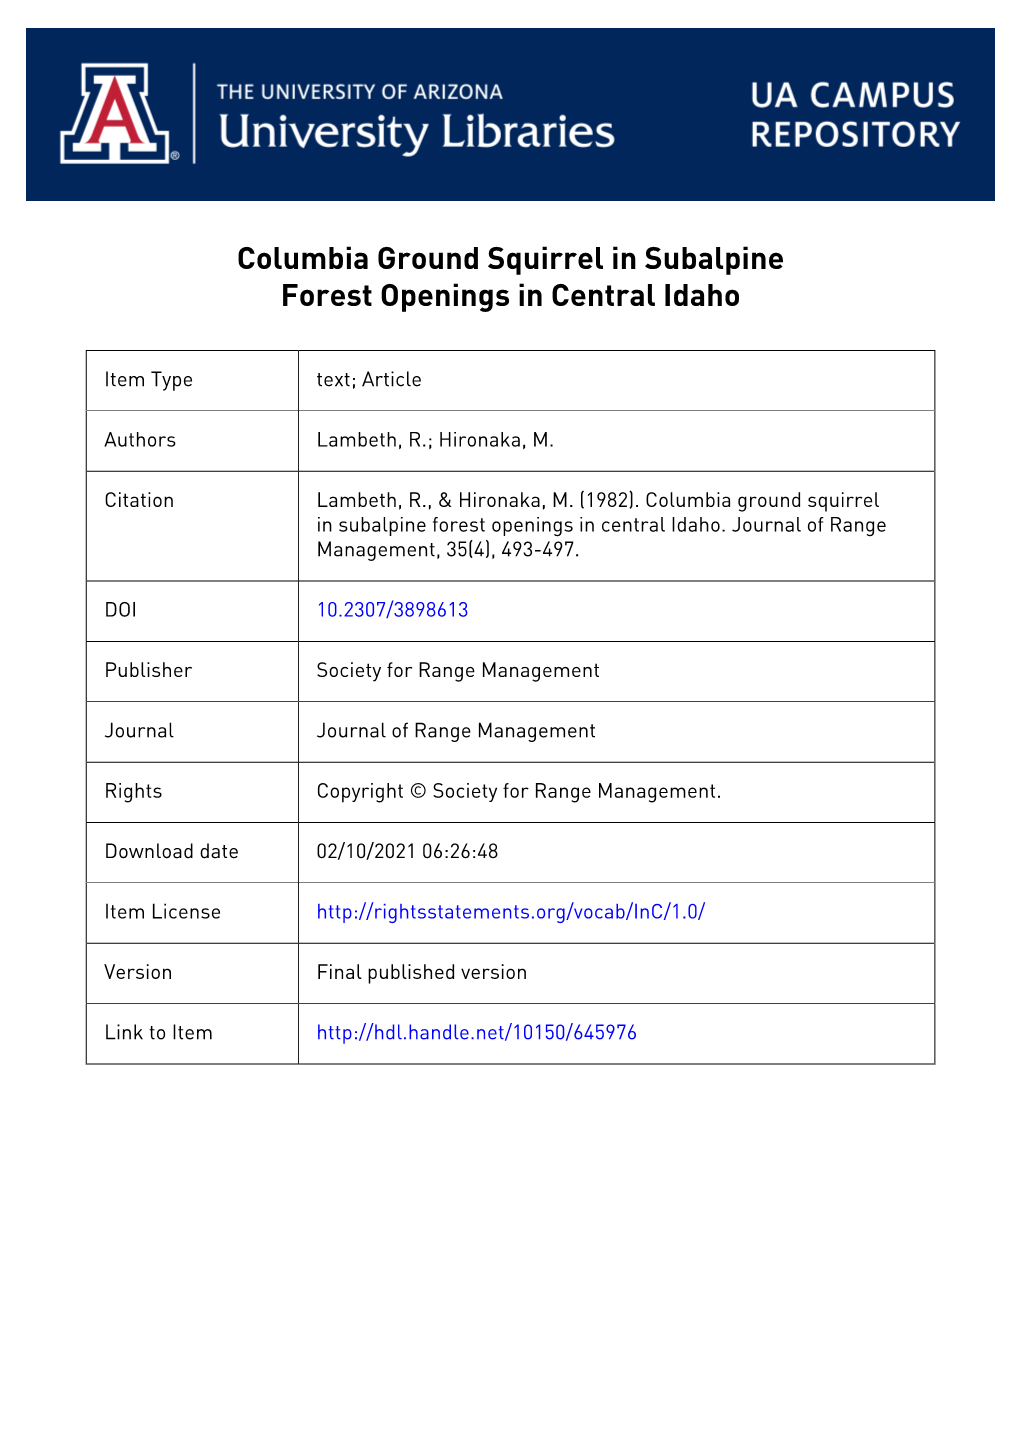 Columbia Ground Forest Openings in Squirrel in Subalpine Central Idaho